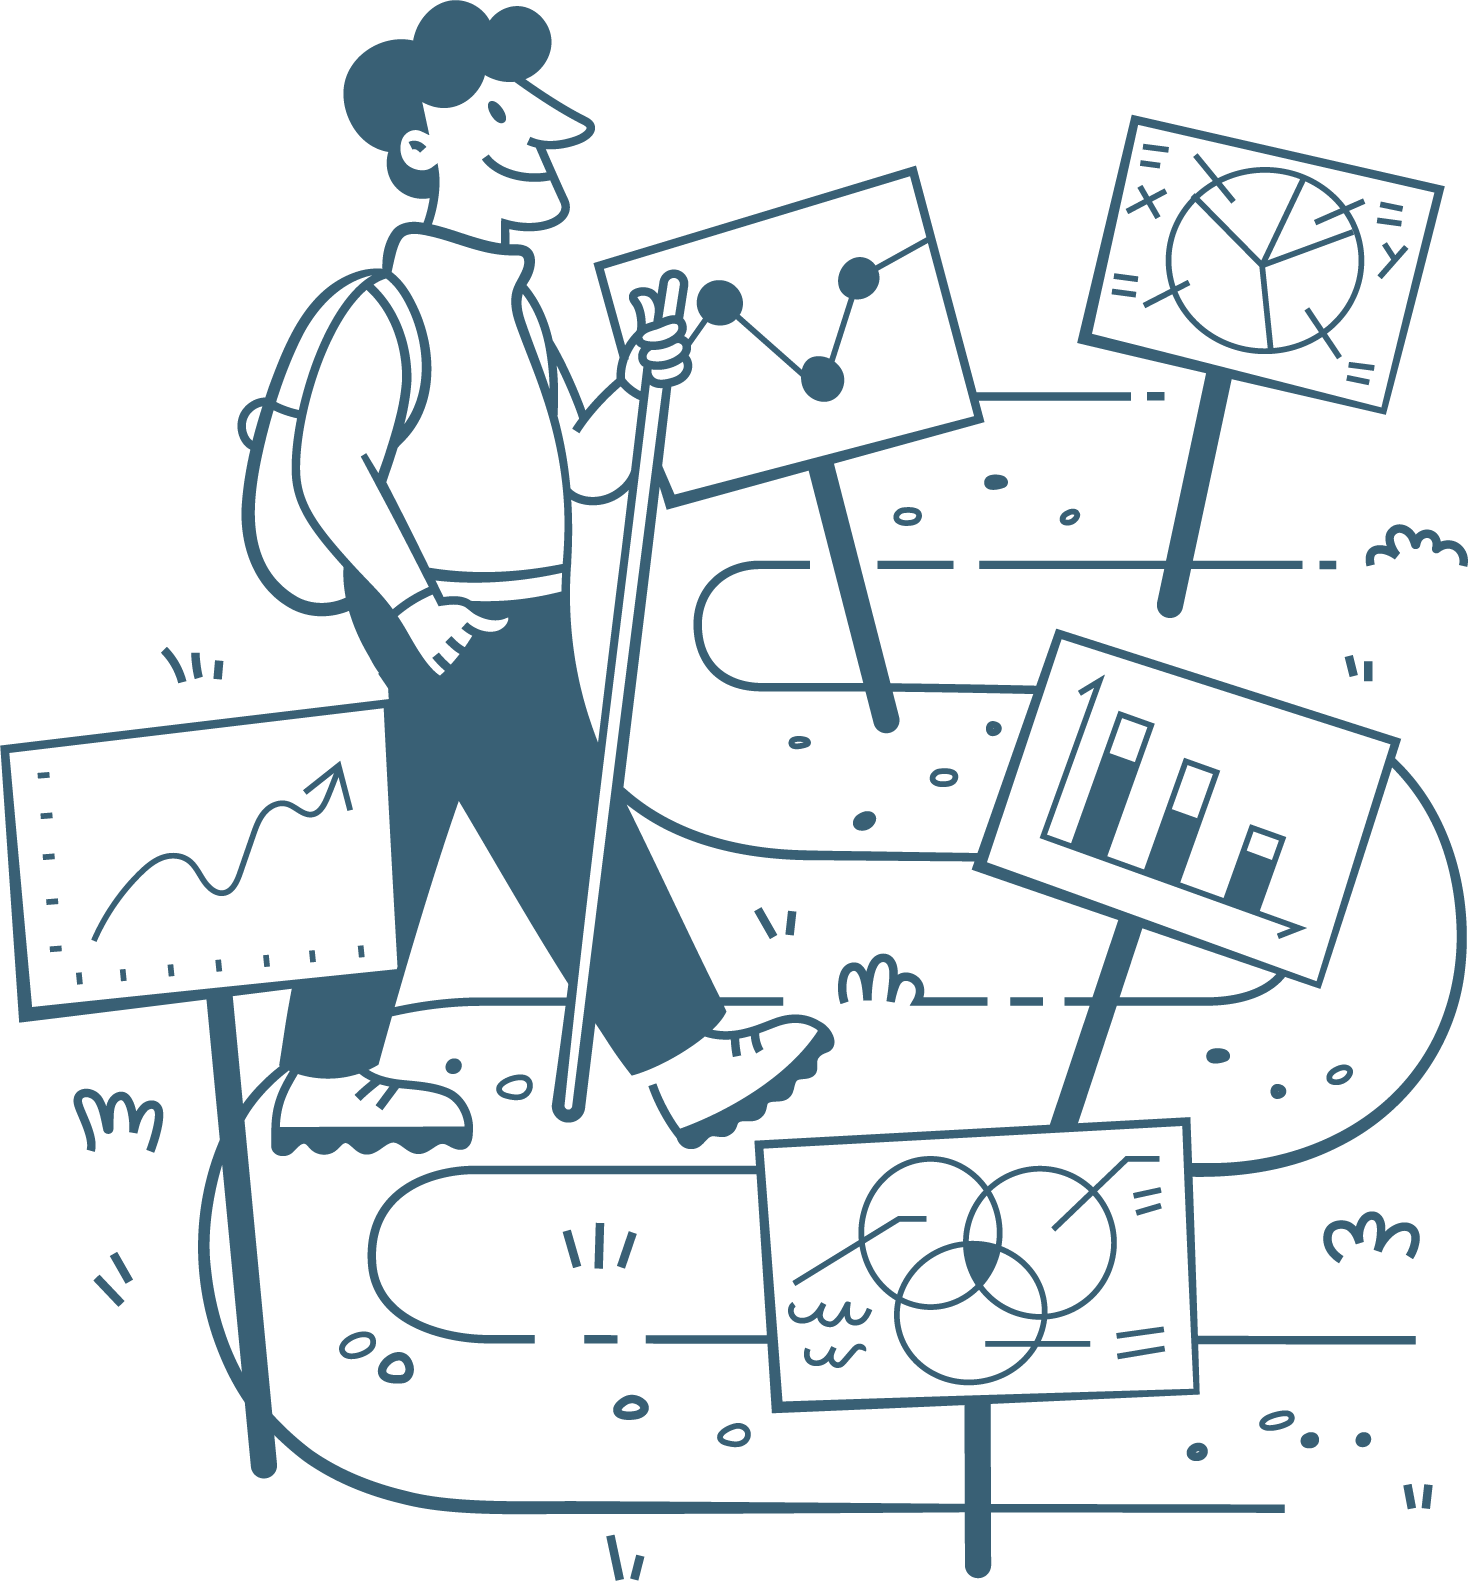 Illustration of a person hiking on a winding path surrounded by signs displaying graphs.